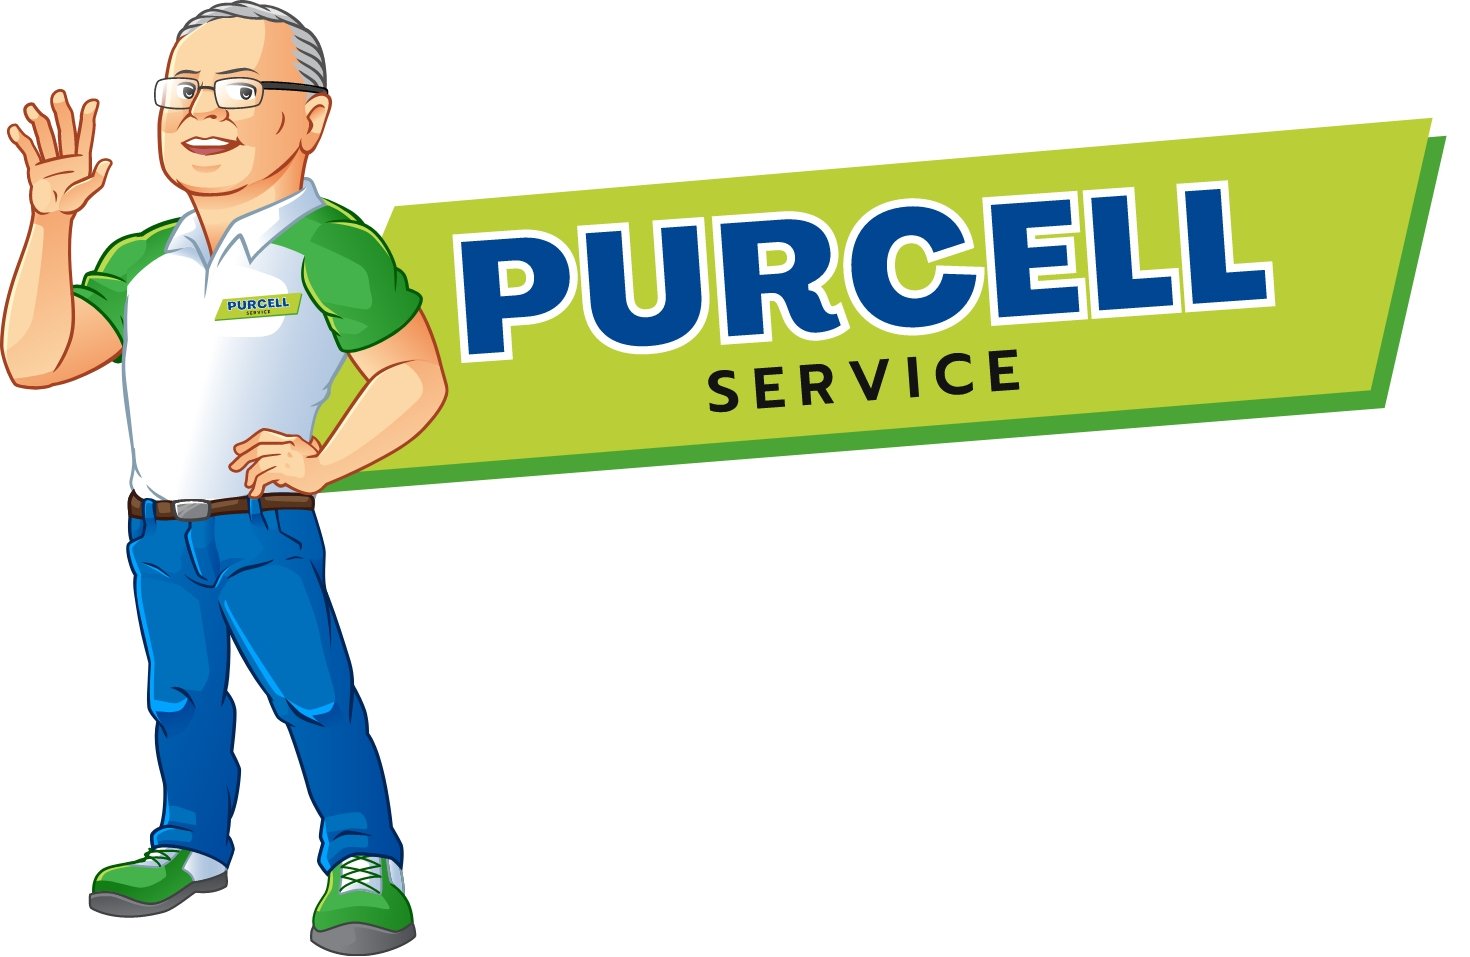 PURCELL SERVICE